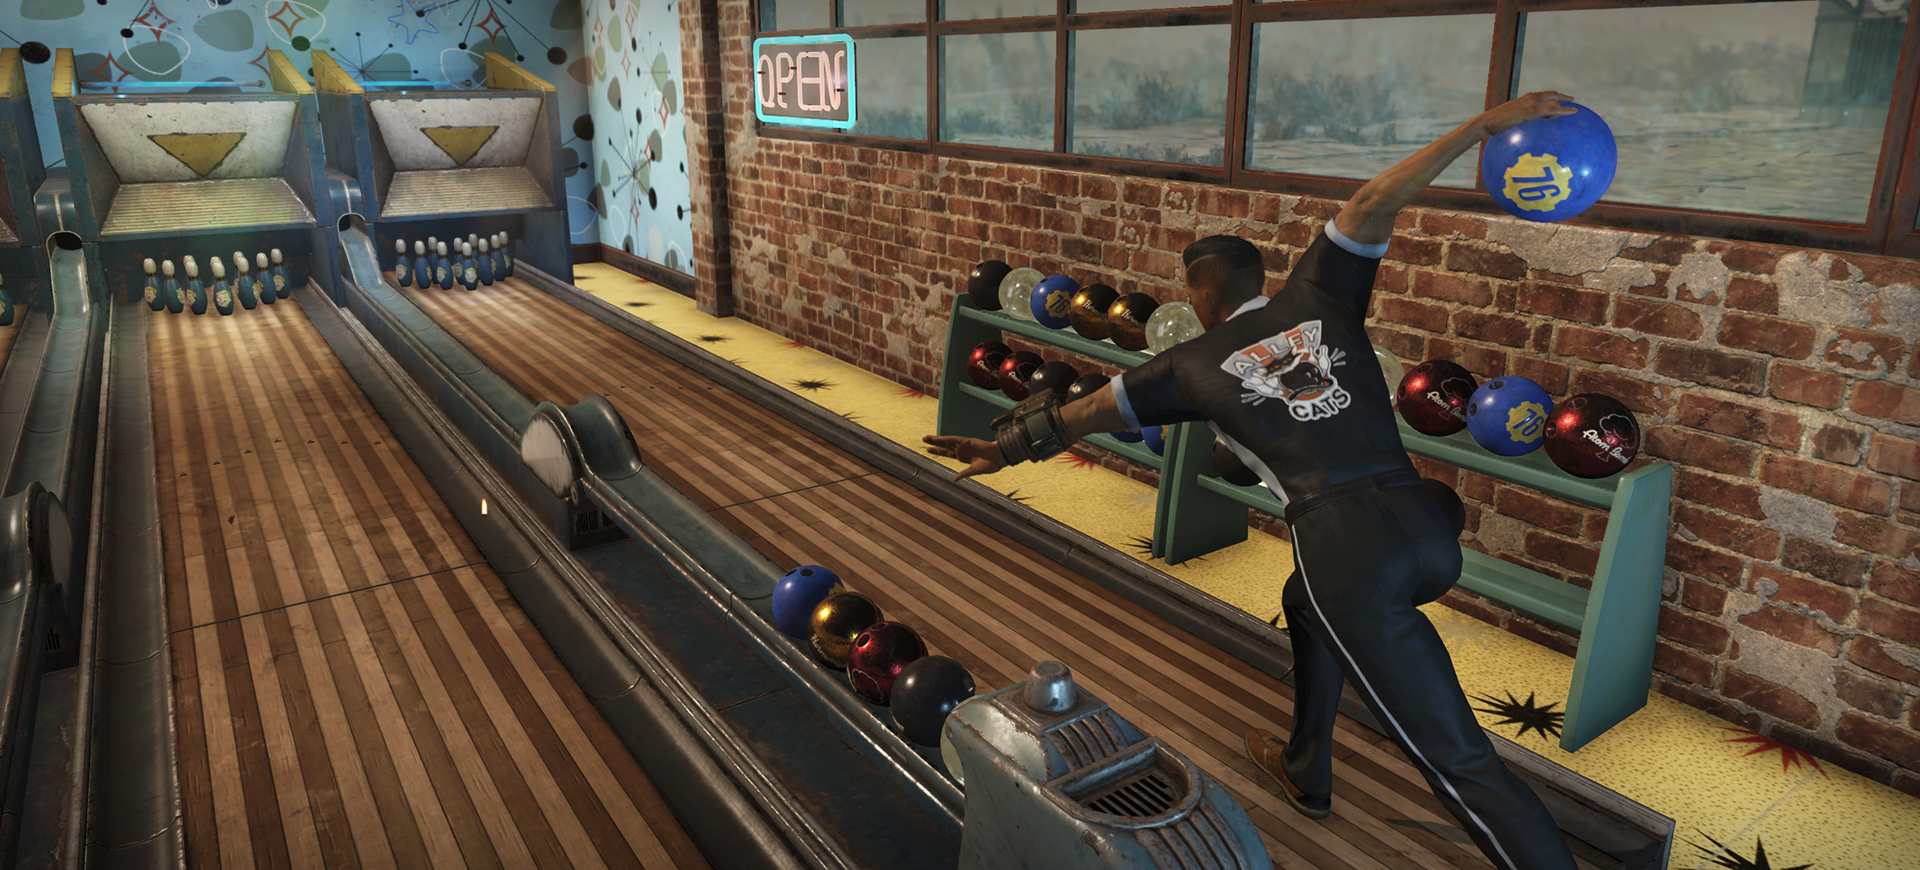 Fallout 76 Atomic Shop Update Have Some Fun with Bowling Team Bundle